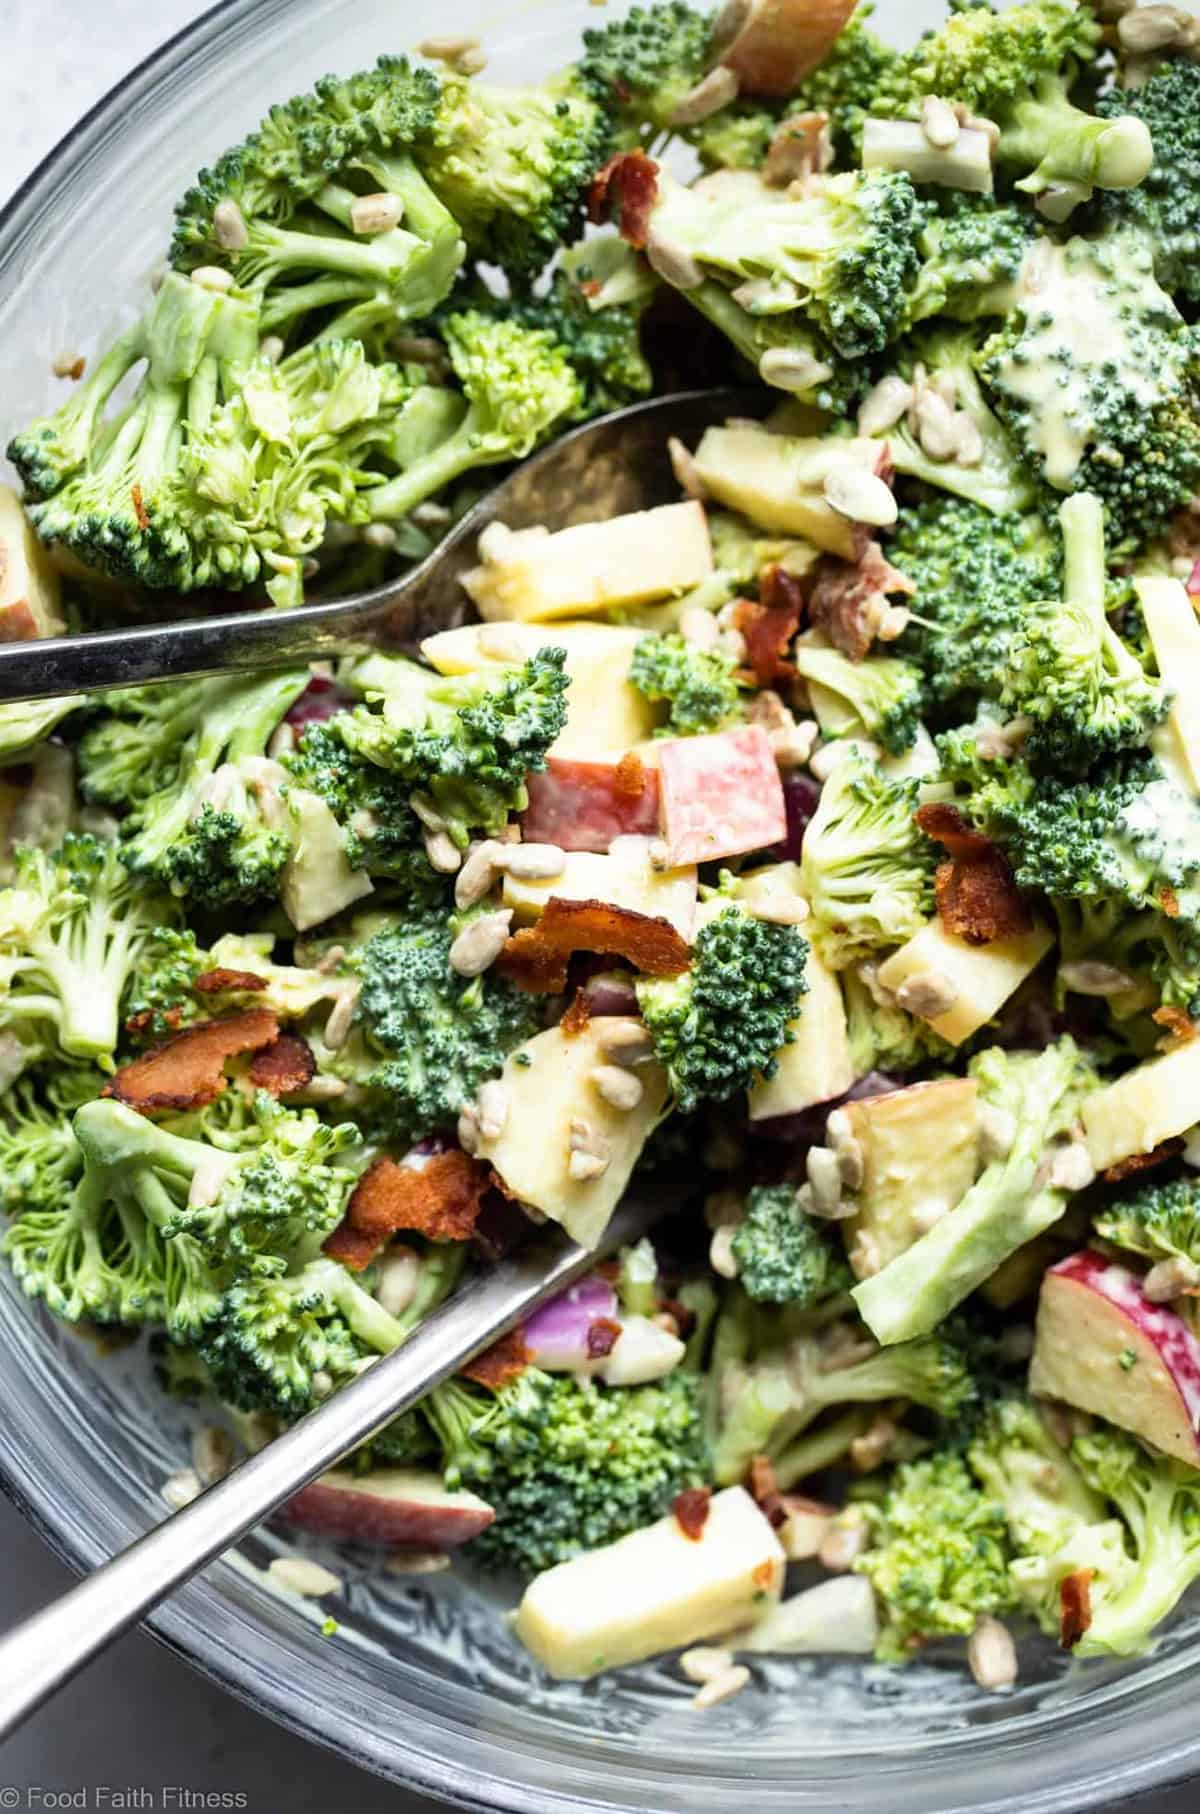 Honey Mustard Broccoli Apple Salad with Greek YogurtÂ  - An easy, gluten free and healthy side dish that even kids will like! It's protein packed and makes great leftovers! | #Foodfaithfitness | #Glutenfree #Grainfree #Healthy #GreekYogurt